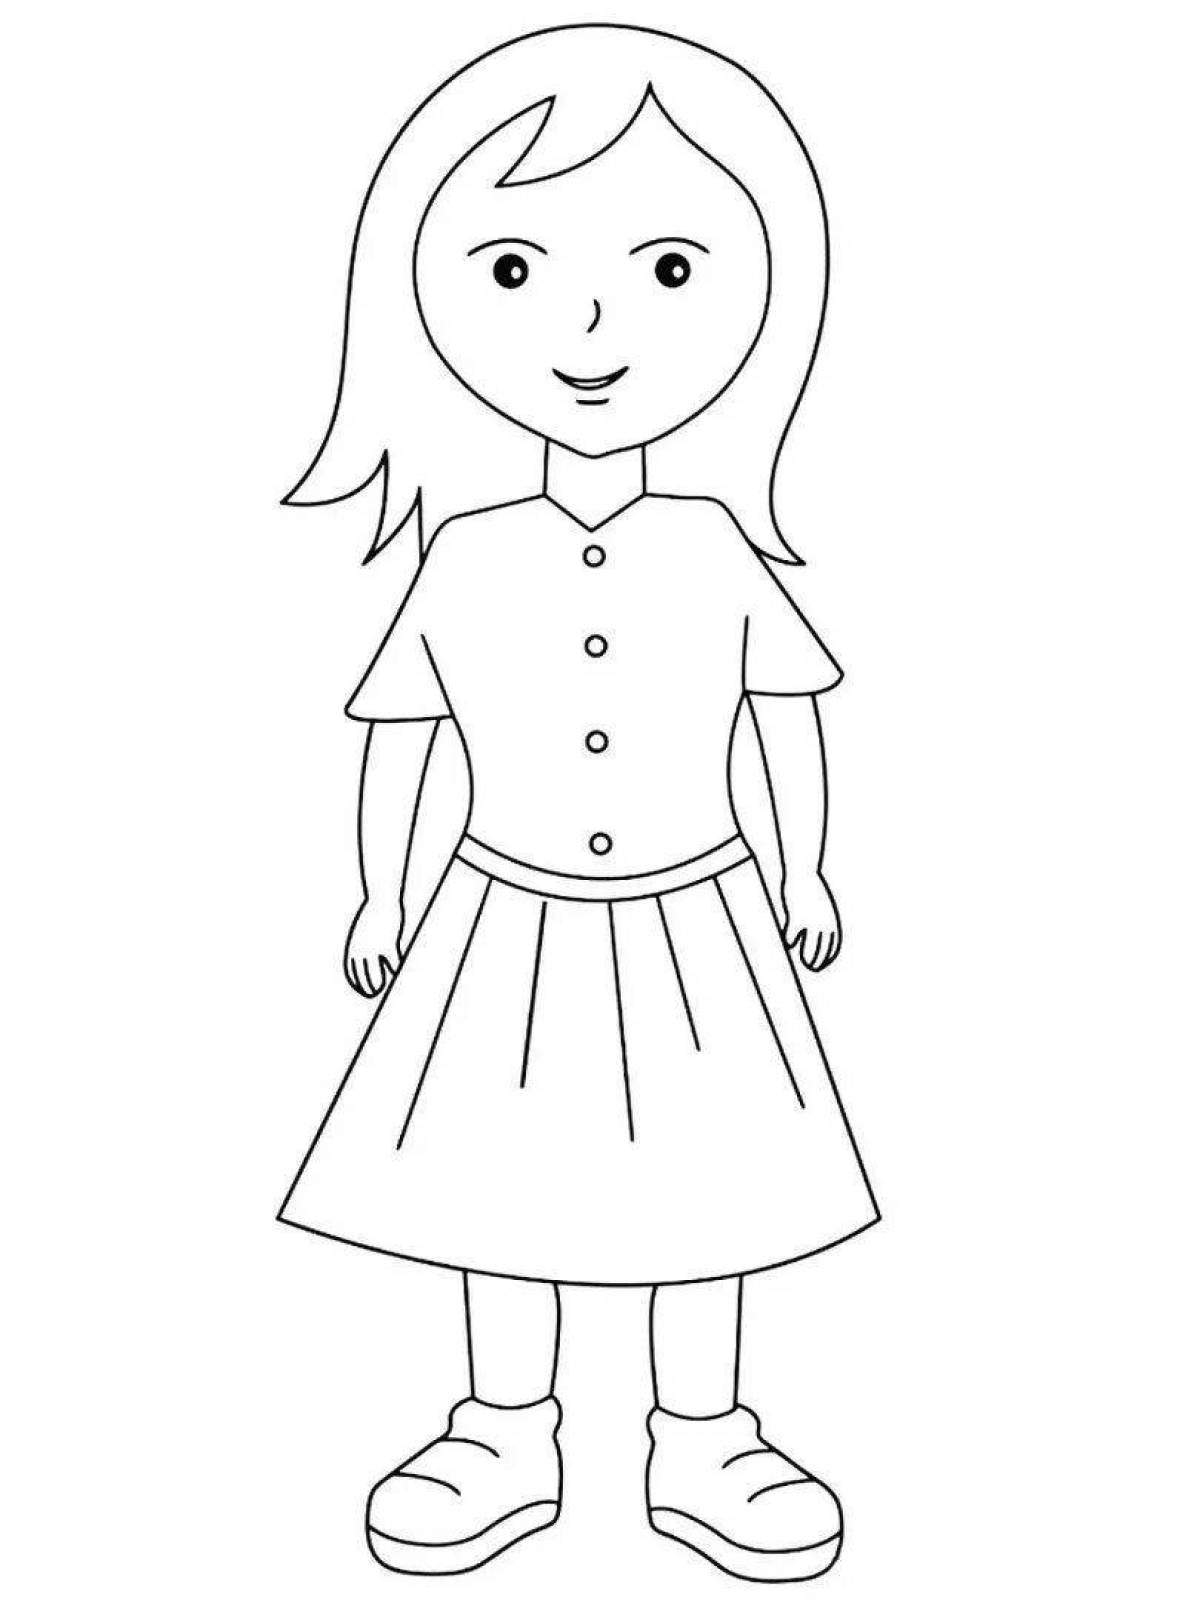 Love of color how to draw coloring pages